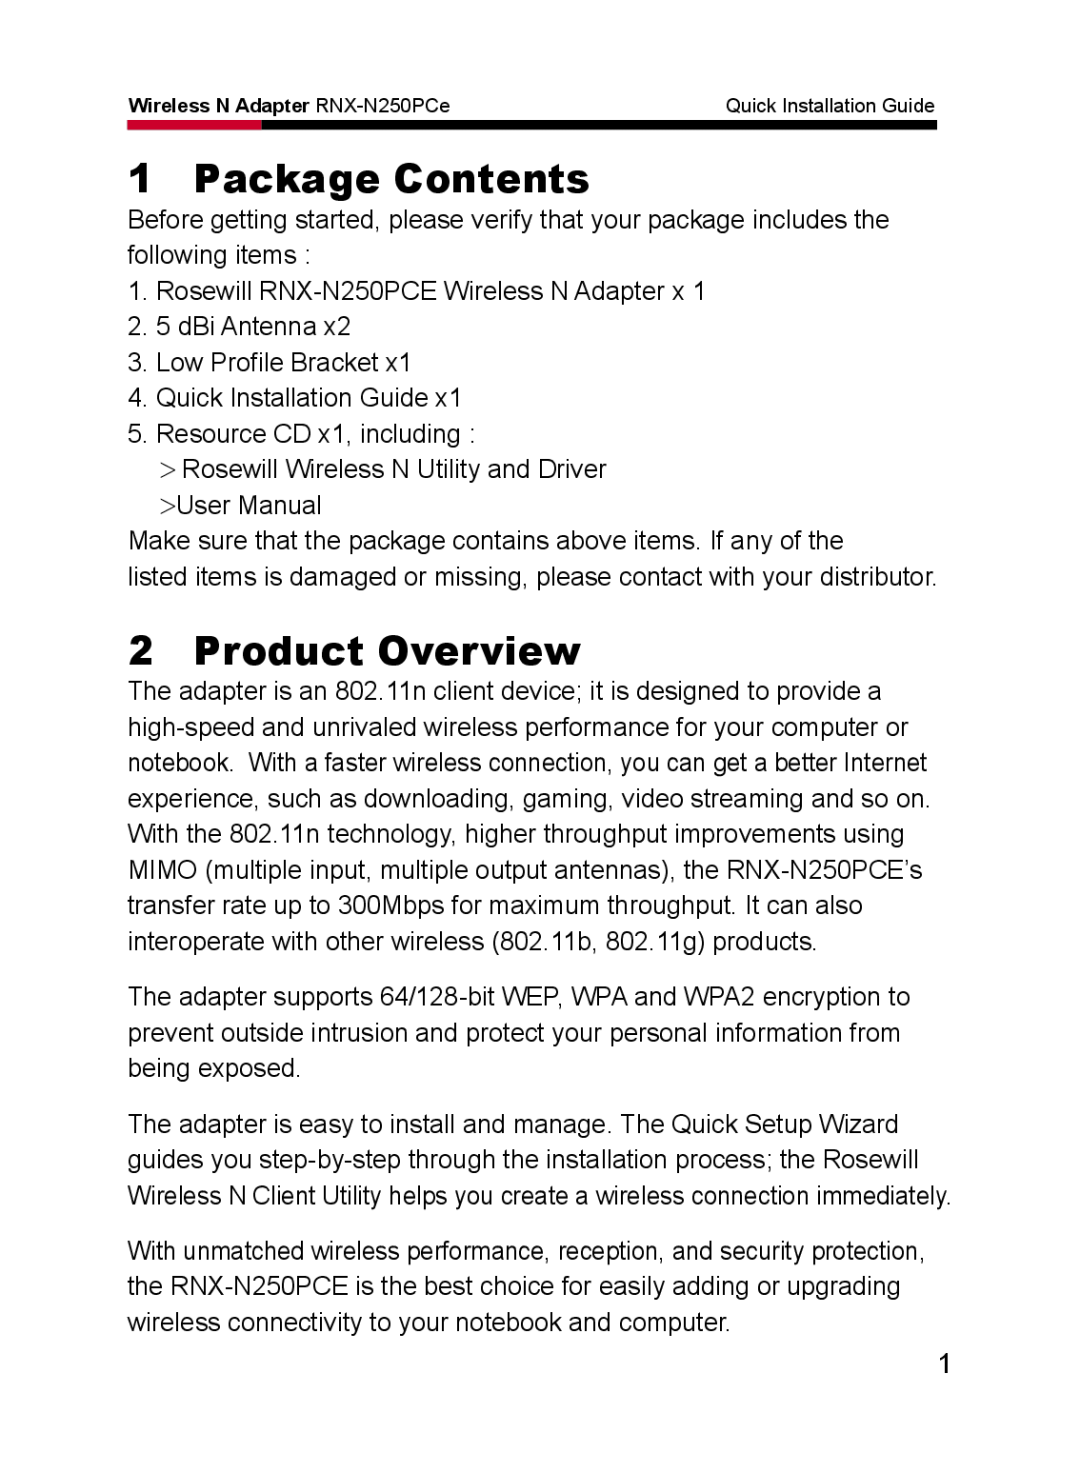 Rosewill RNX-N250PCe manual Package Contents, Product Overview 